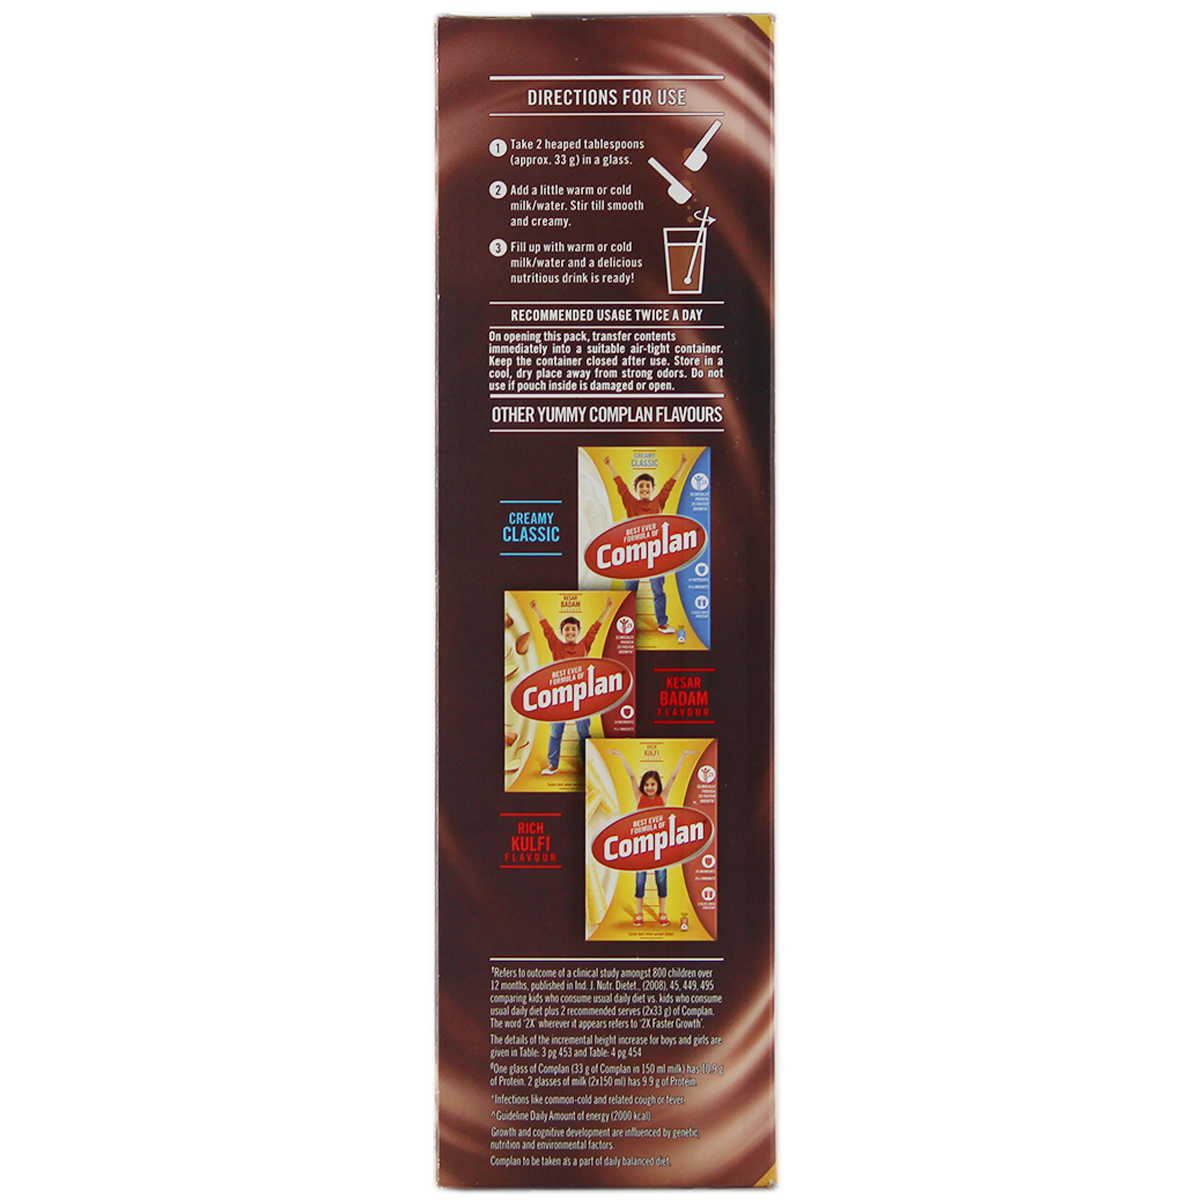 Complan Chocolate Drink Refill 1kg